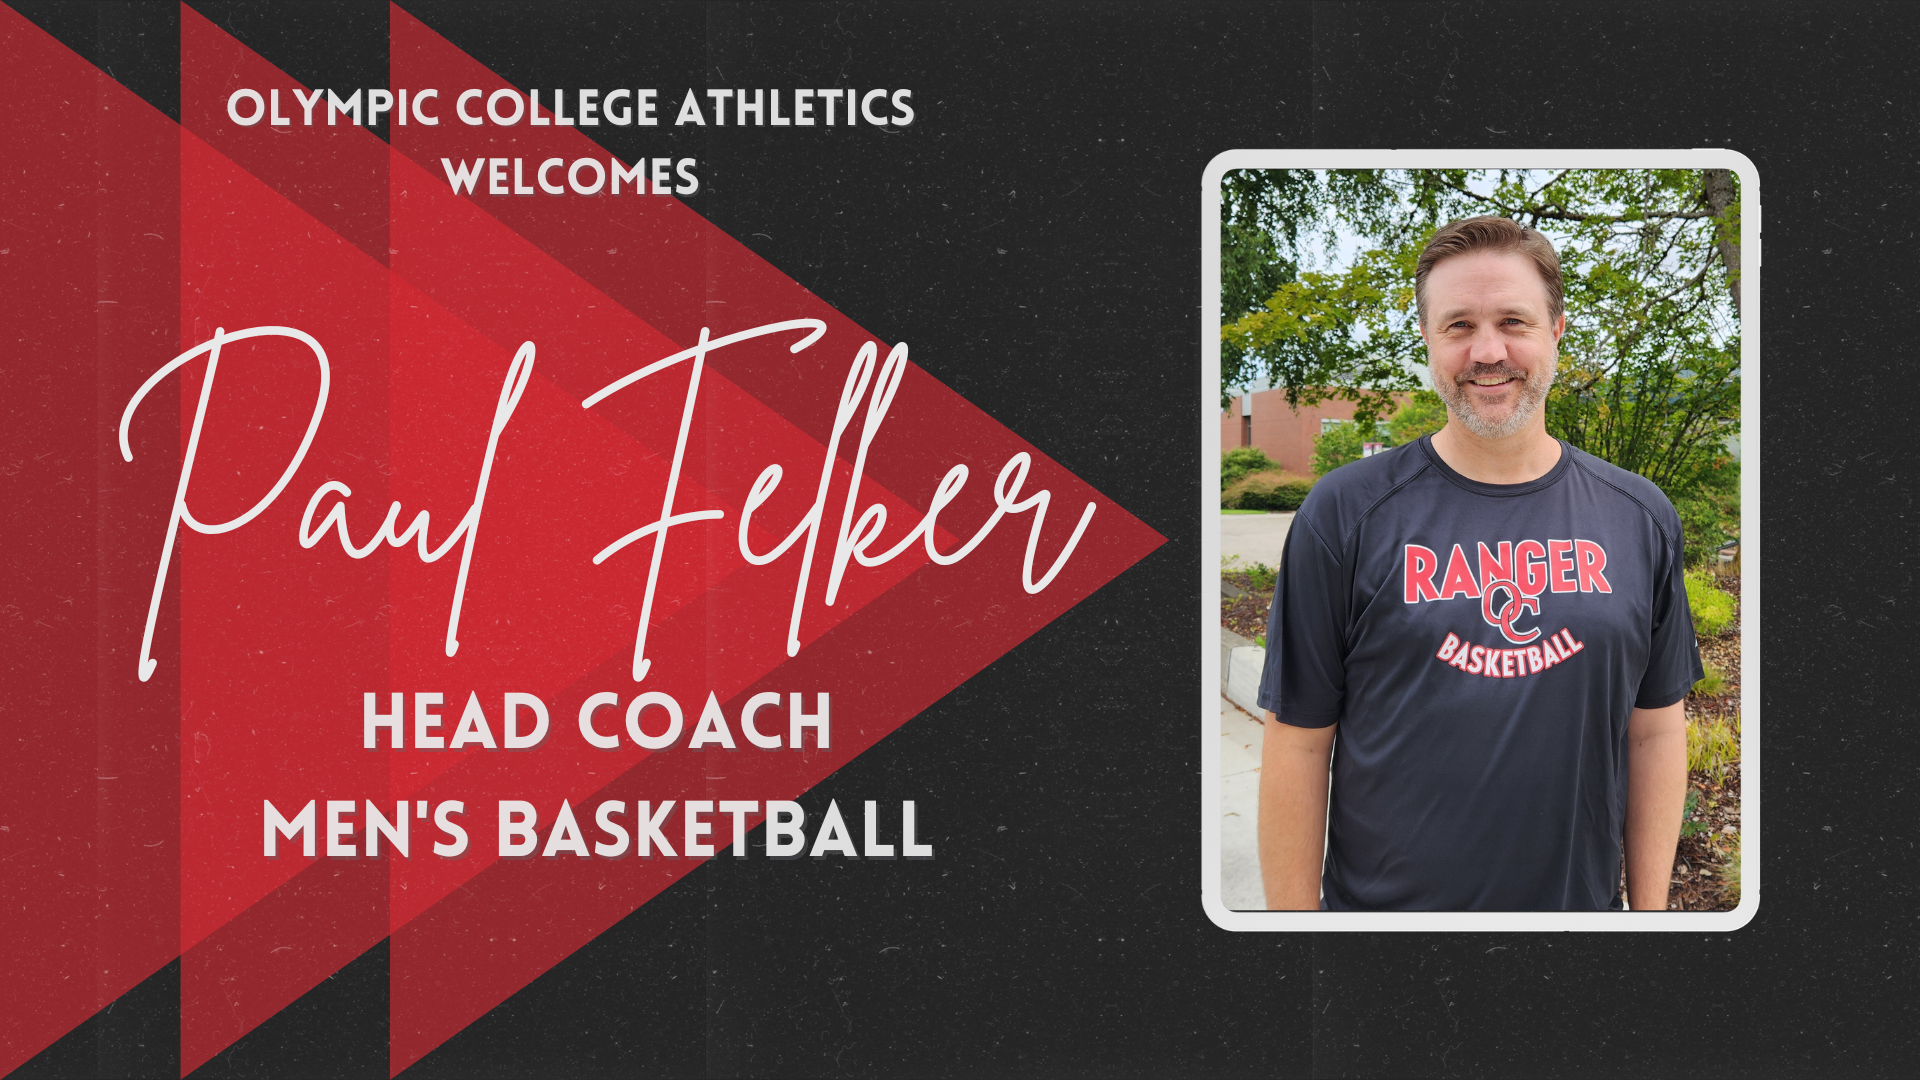 On the left: Olympic College Athletics Welcomes Paul Felker, Head Coach Men's Basketball. A photo of Paul is on the right